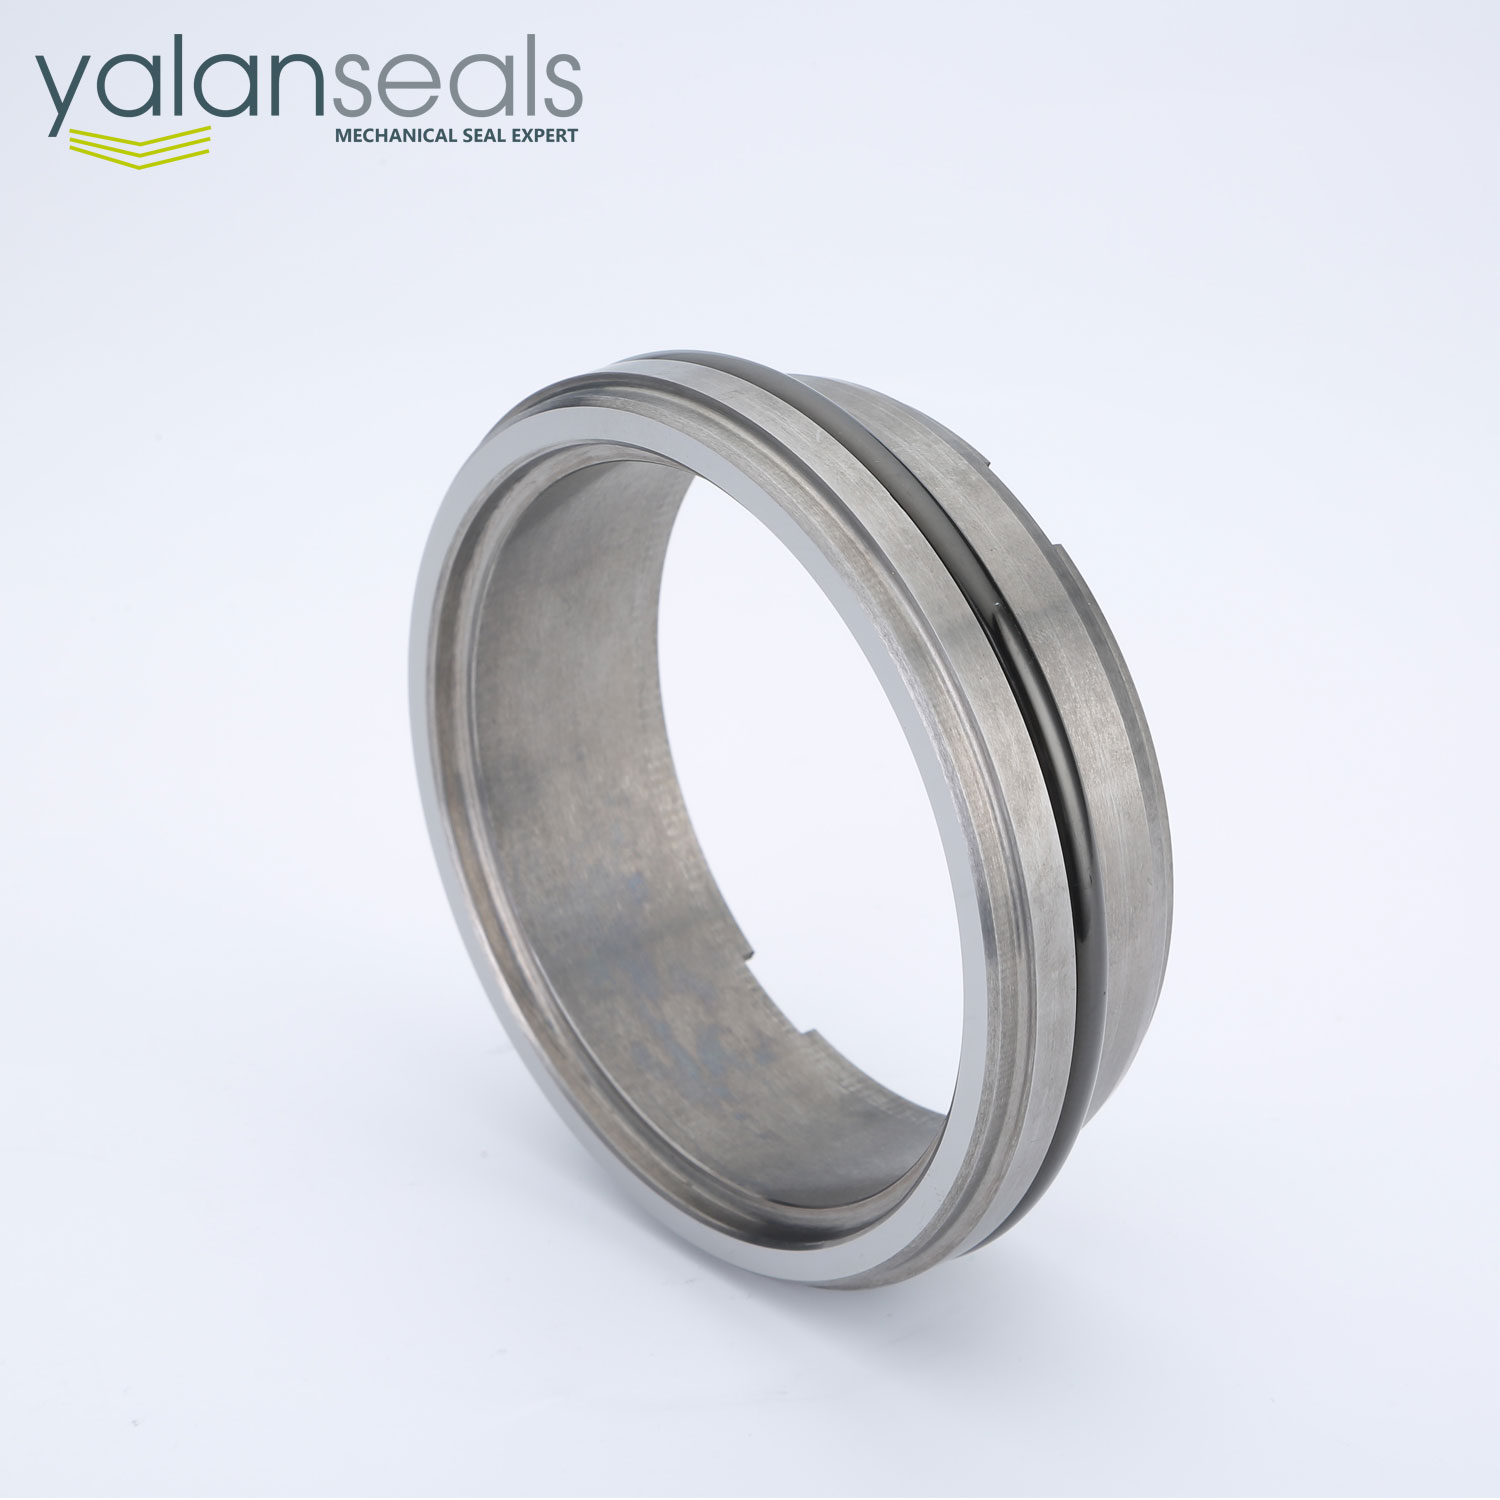 Customized Nonstandard Mechanical Seals for WILO